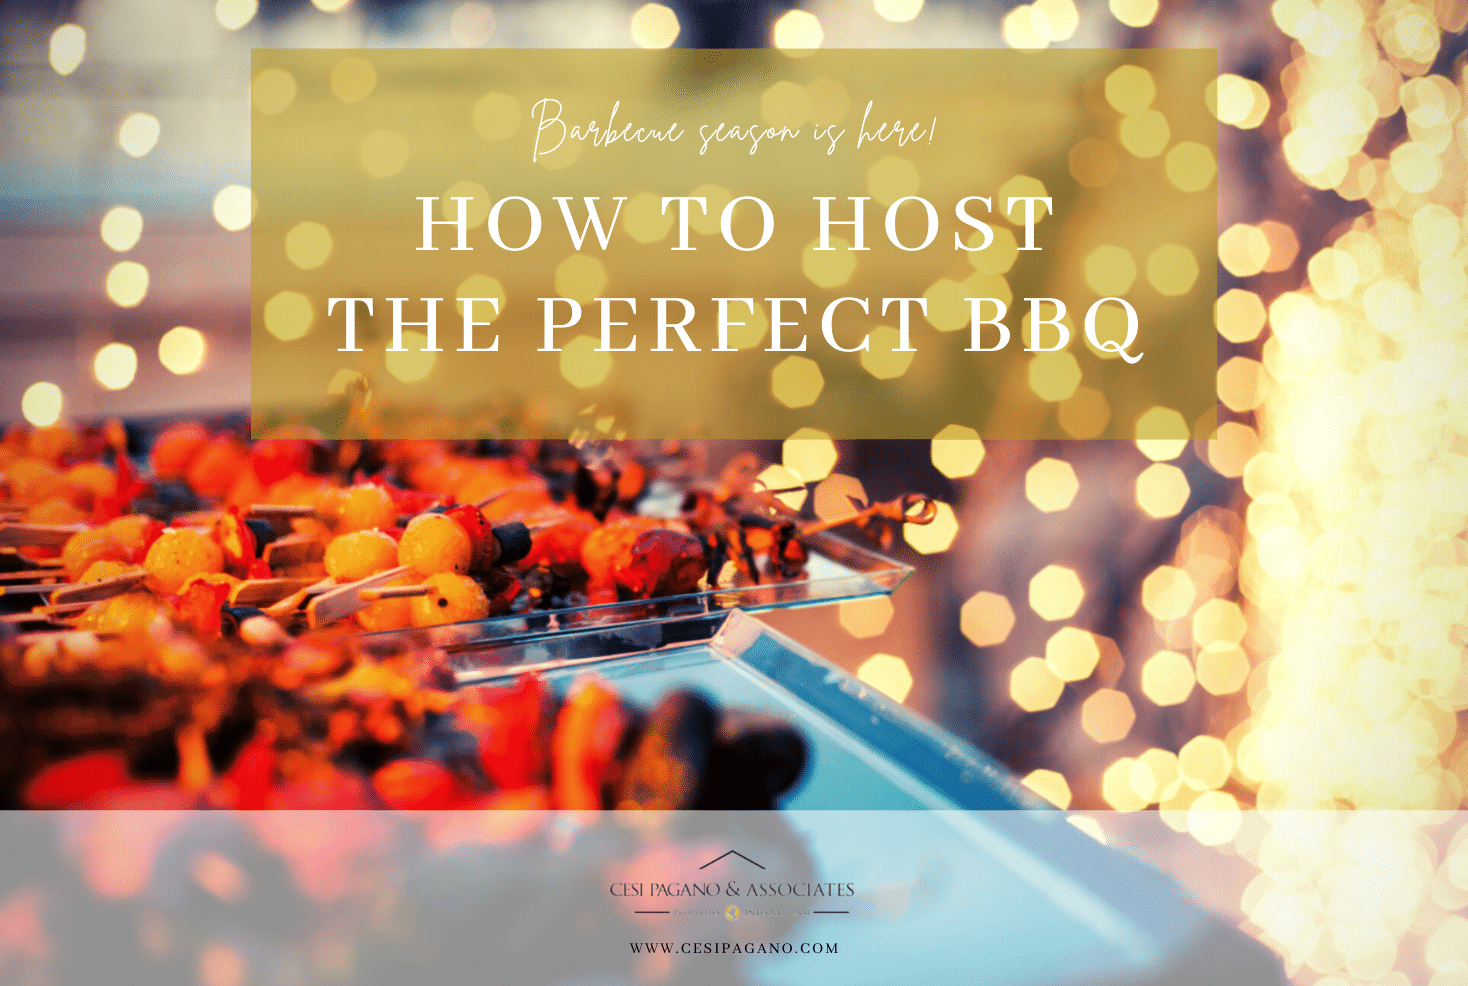 Hosting The Perfect BBQ